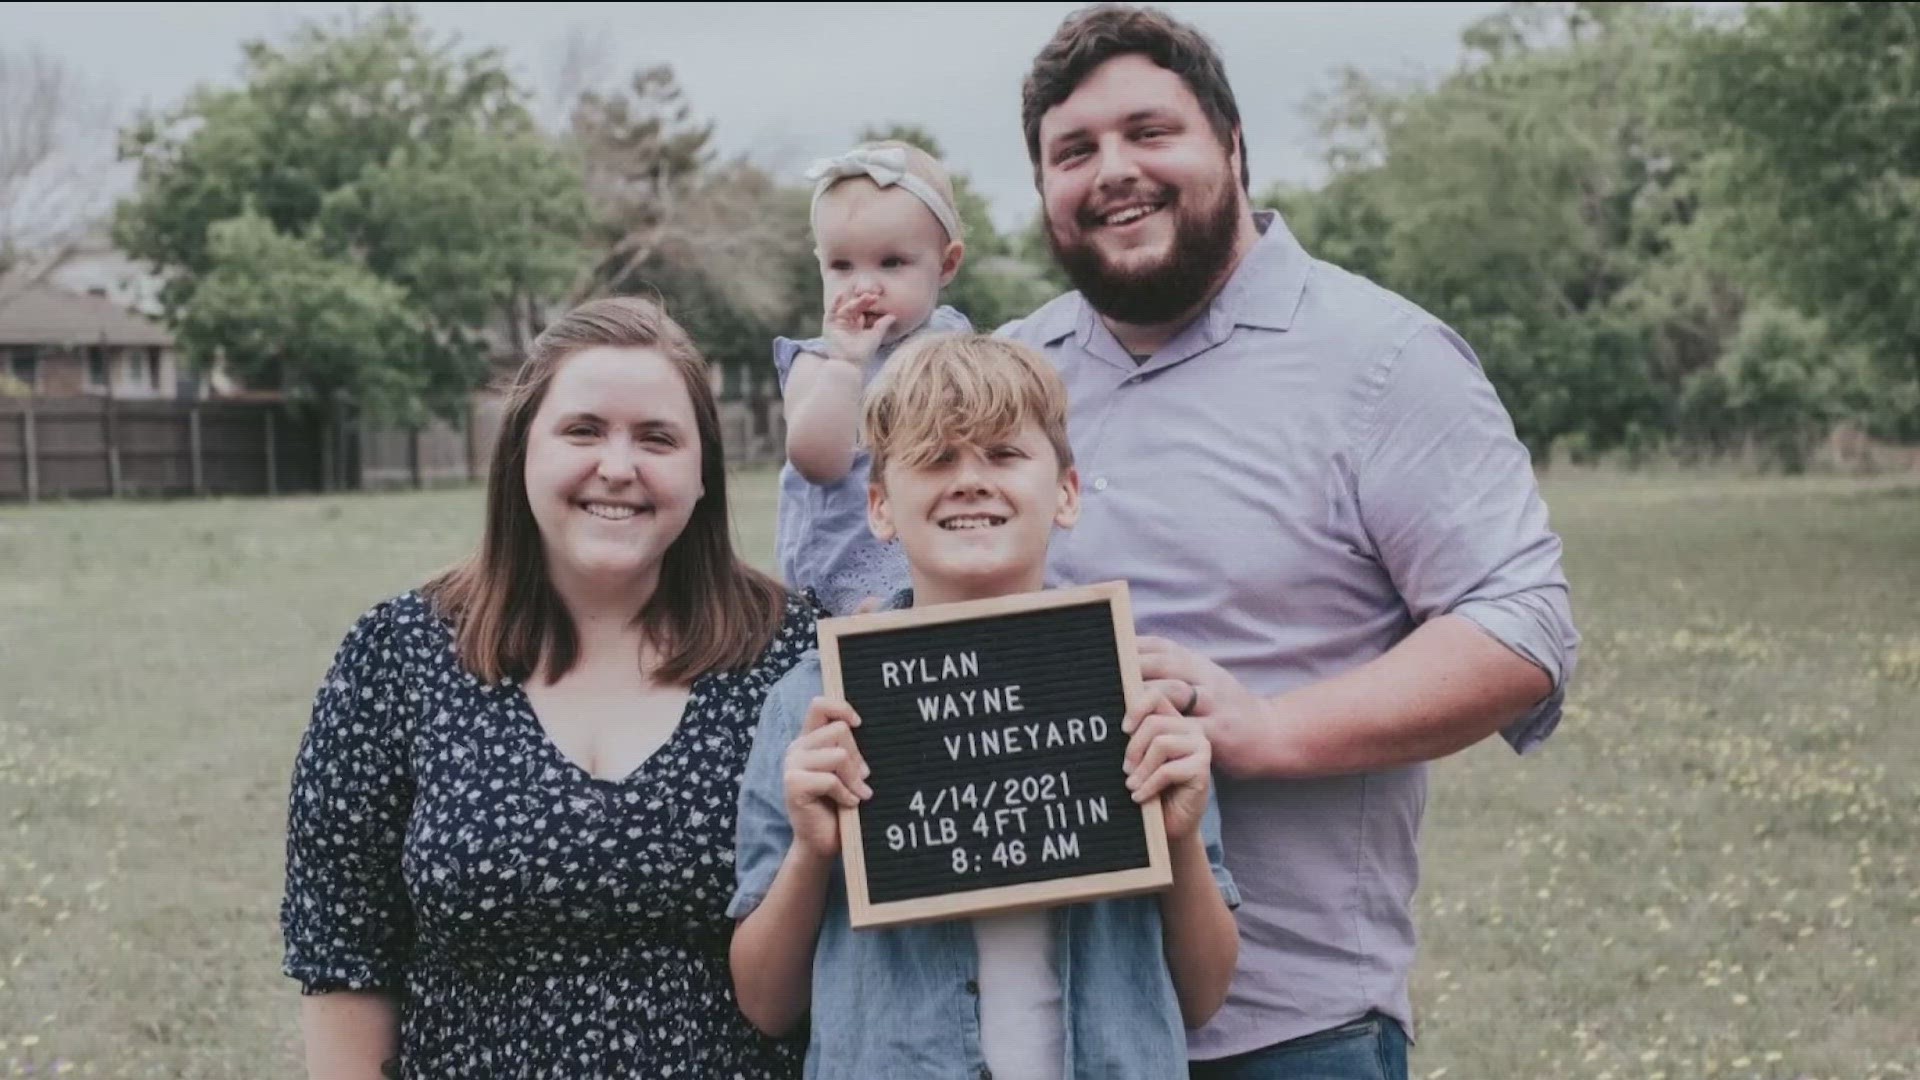 Meet Jon and Sarah Vineyard, a Leander couple who have fostered six children over the years.